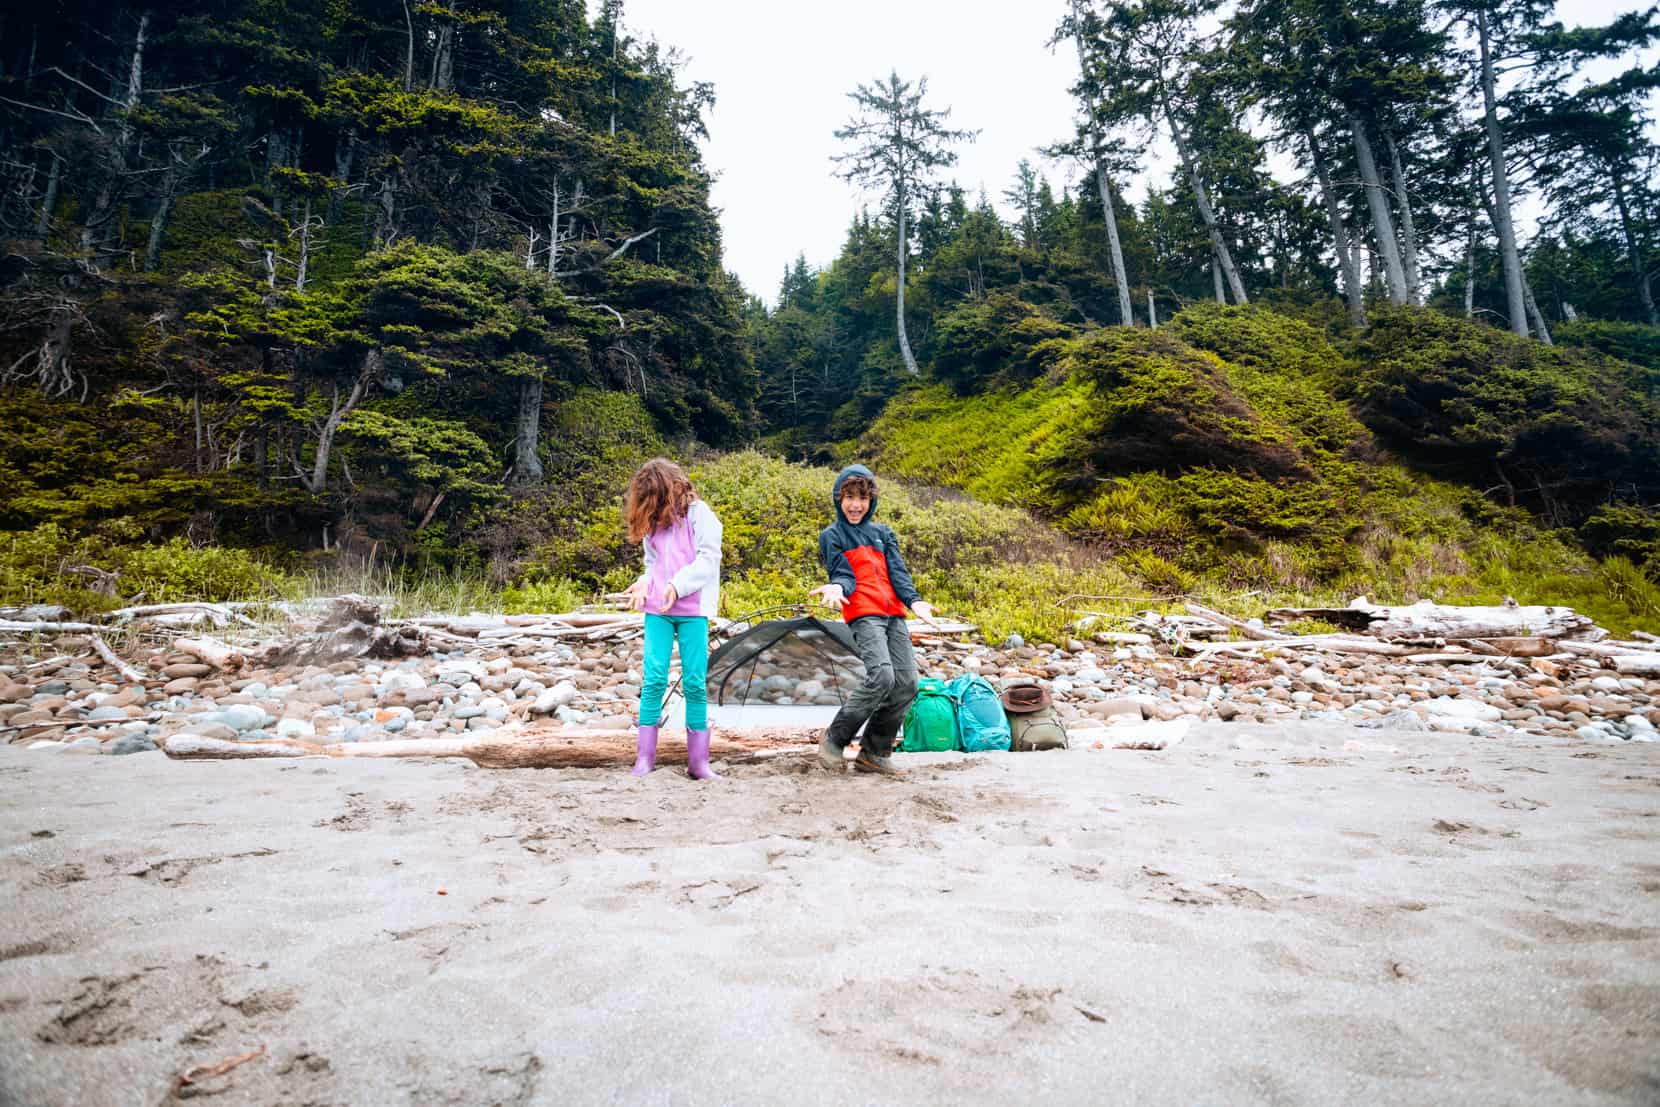 Backpacking on the beach with kids